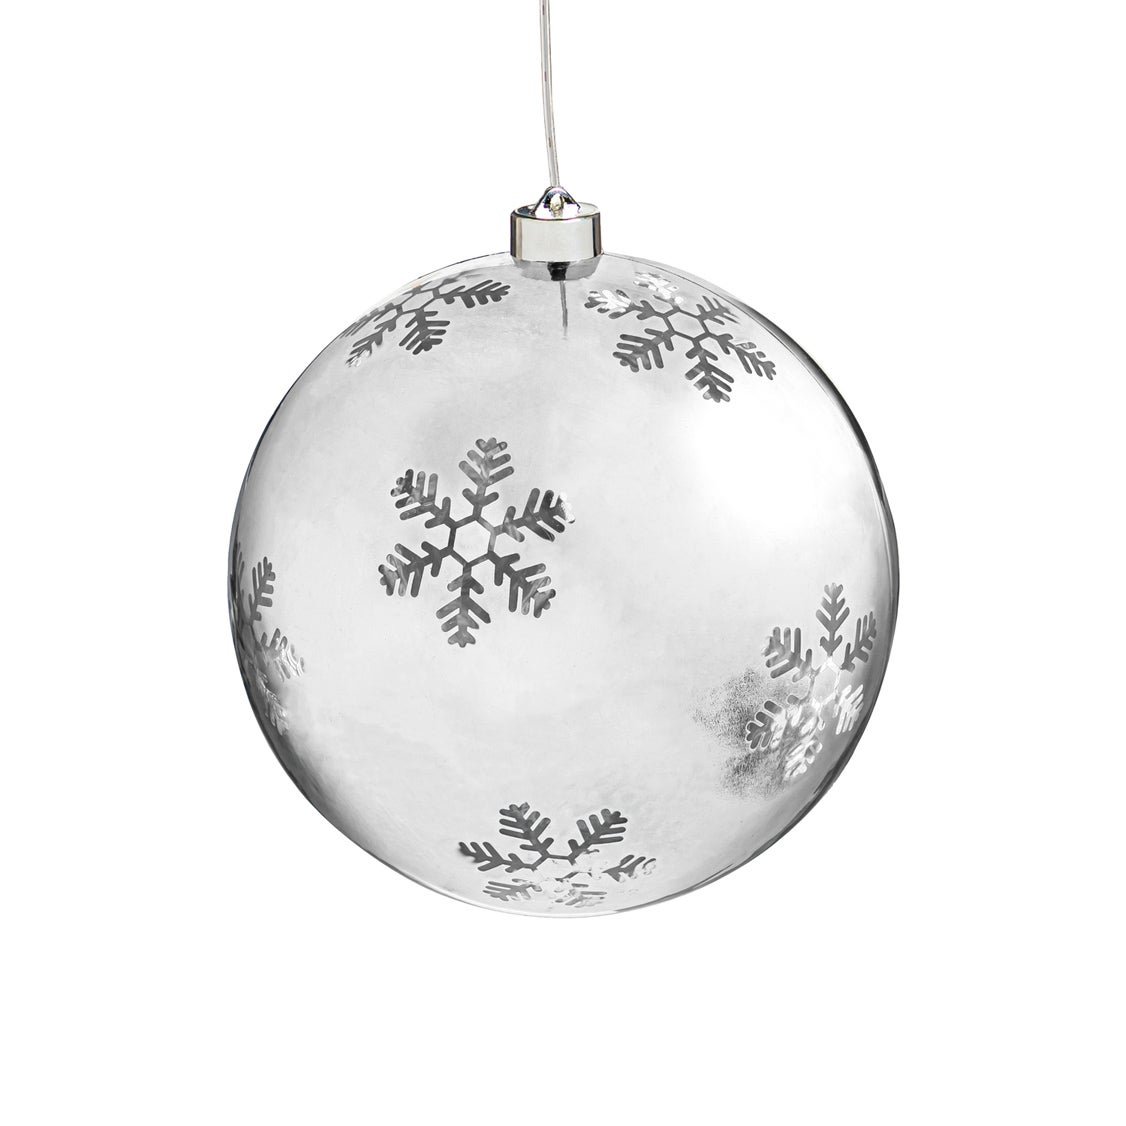 8" Shatterproof Battery Operated Ornament with Snowflakes, Silver